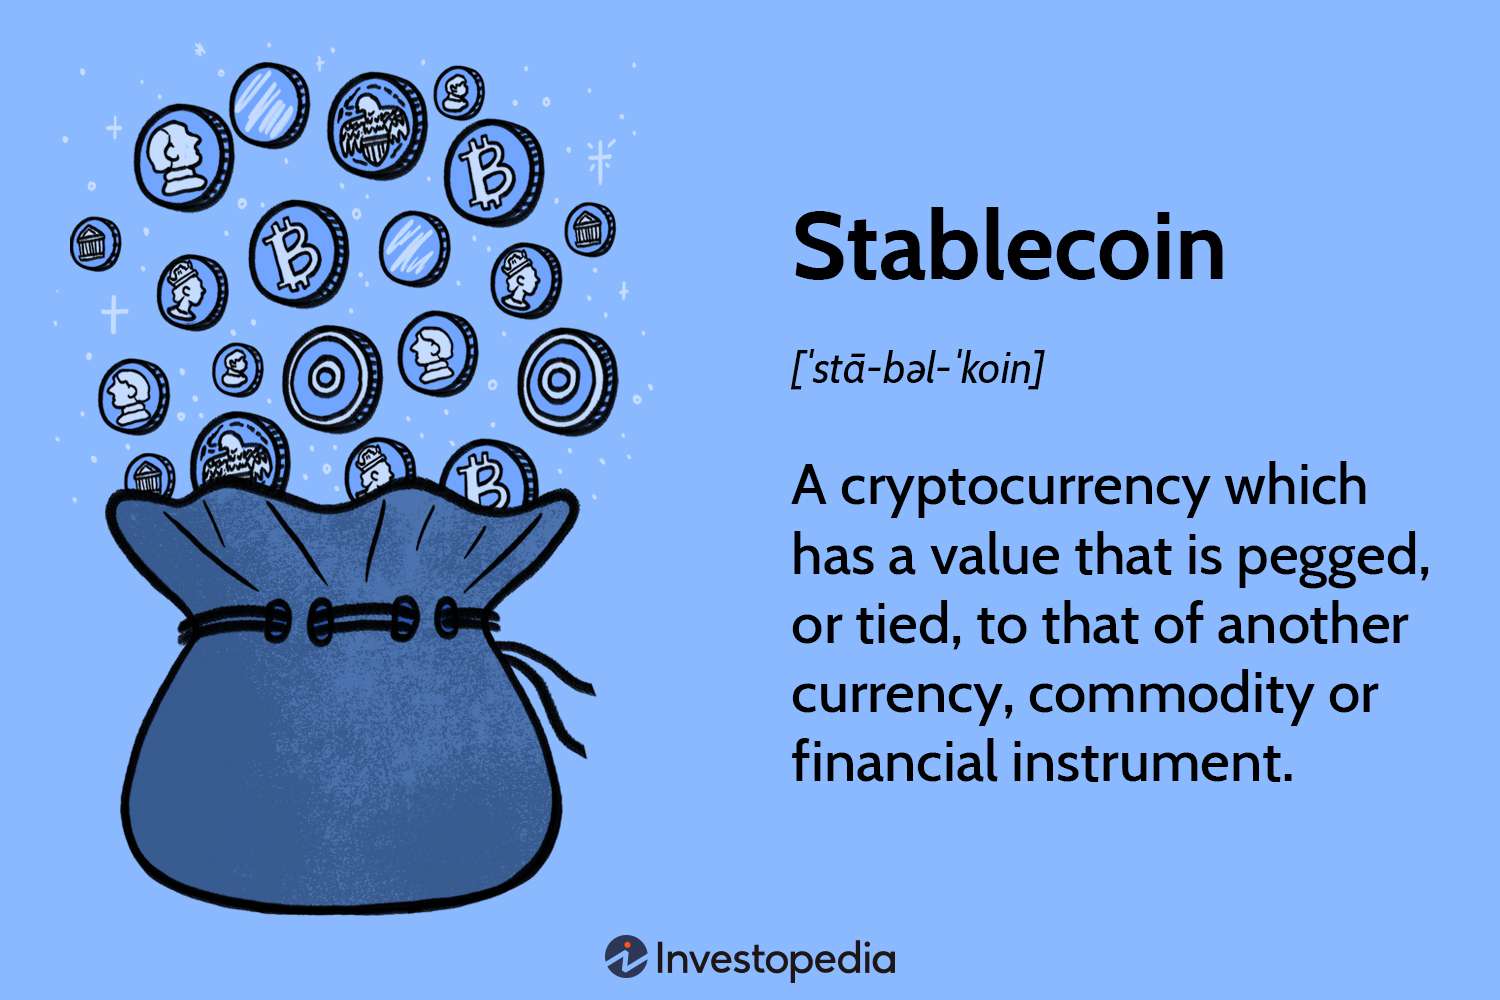 Stablecoin definition